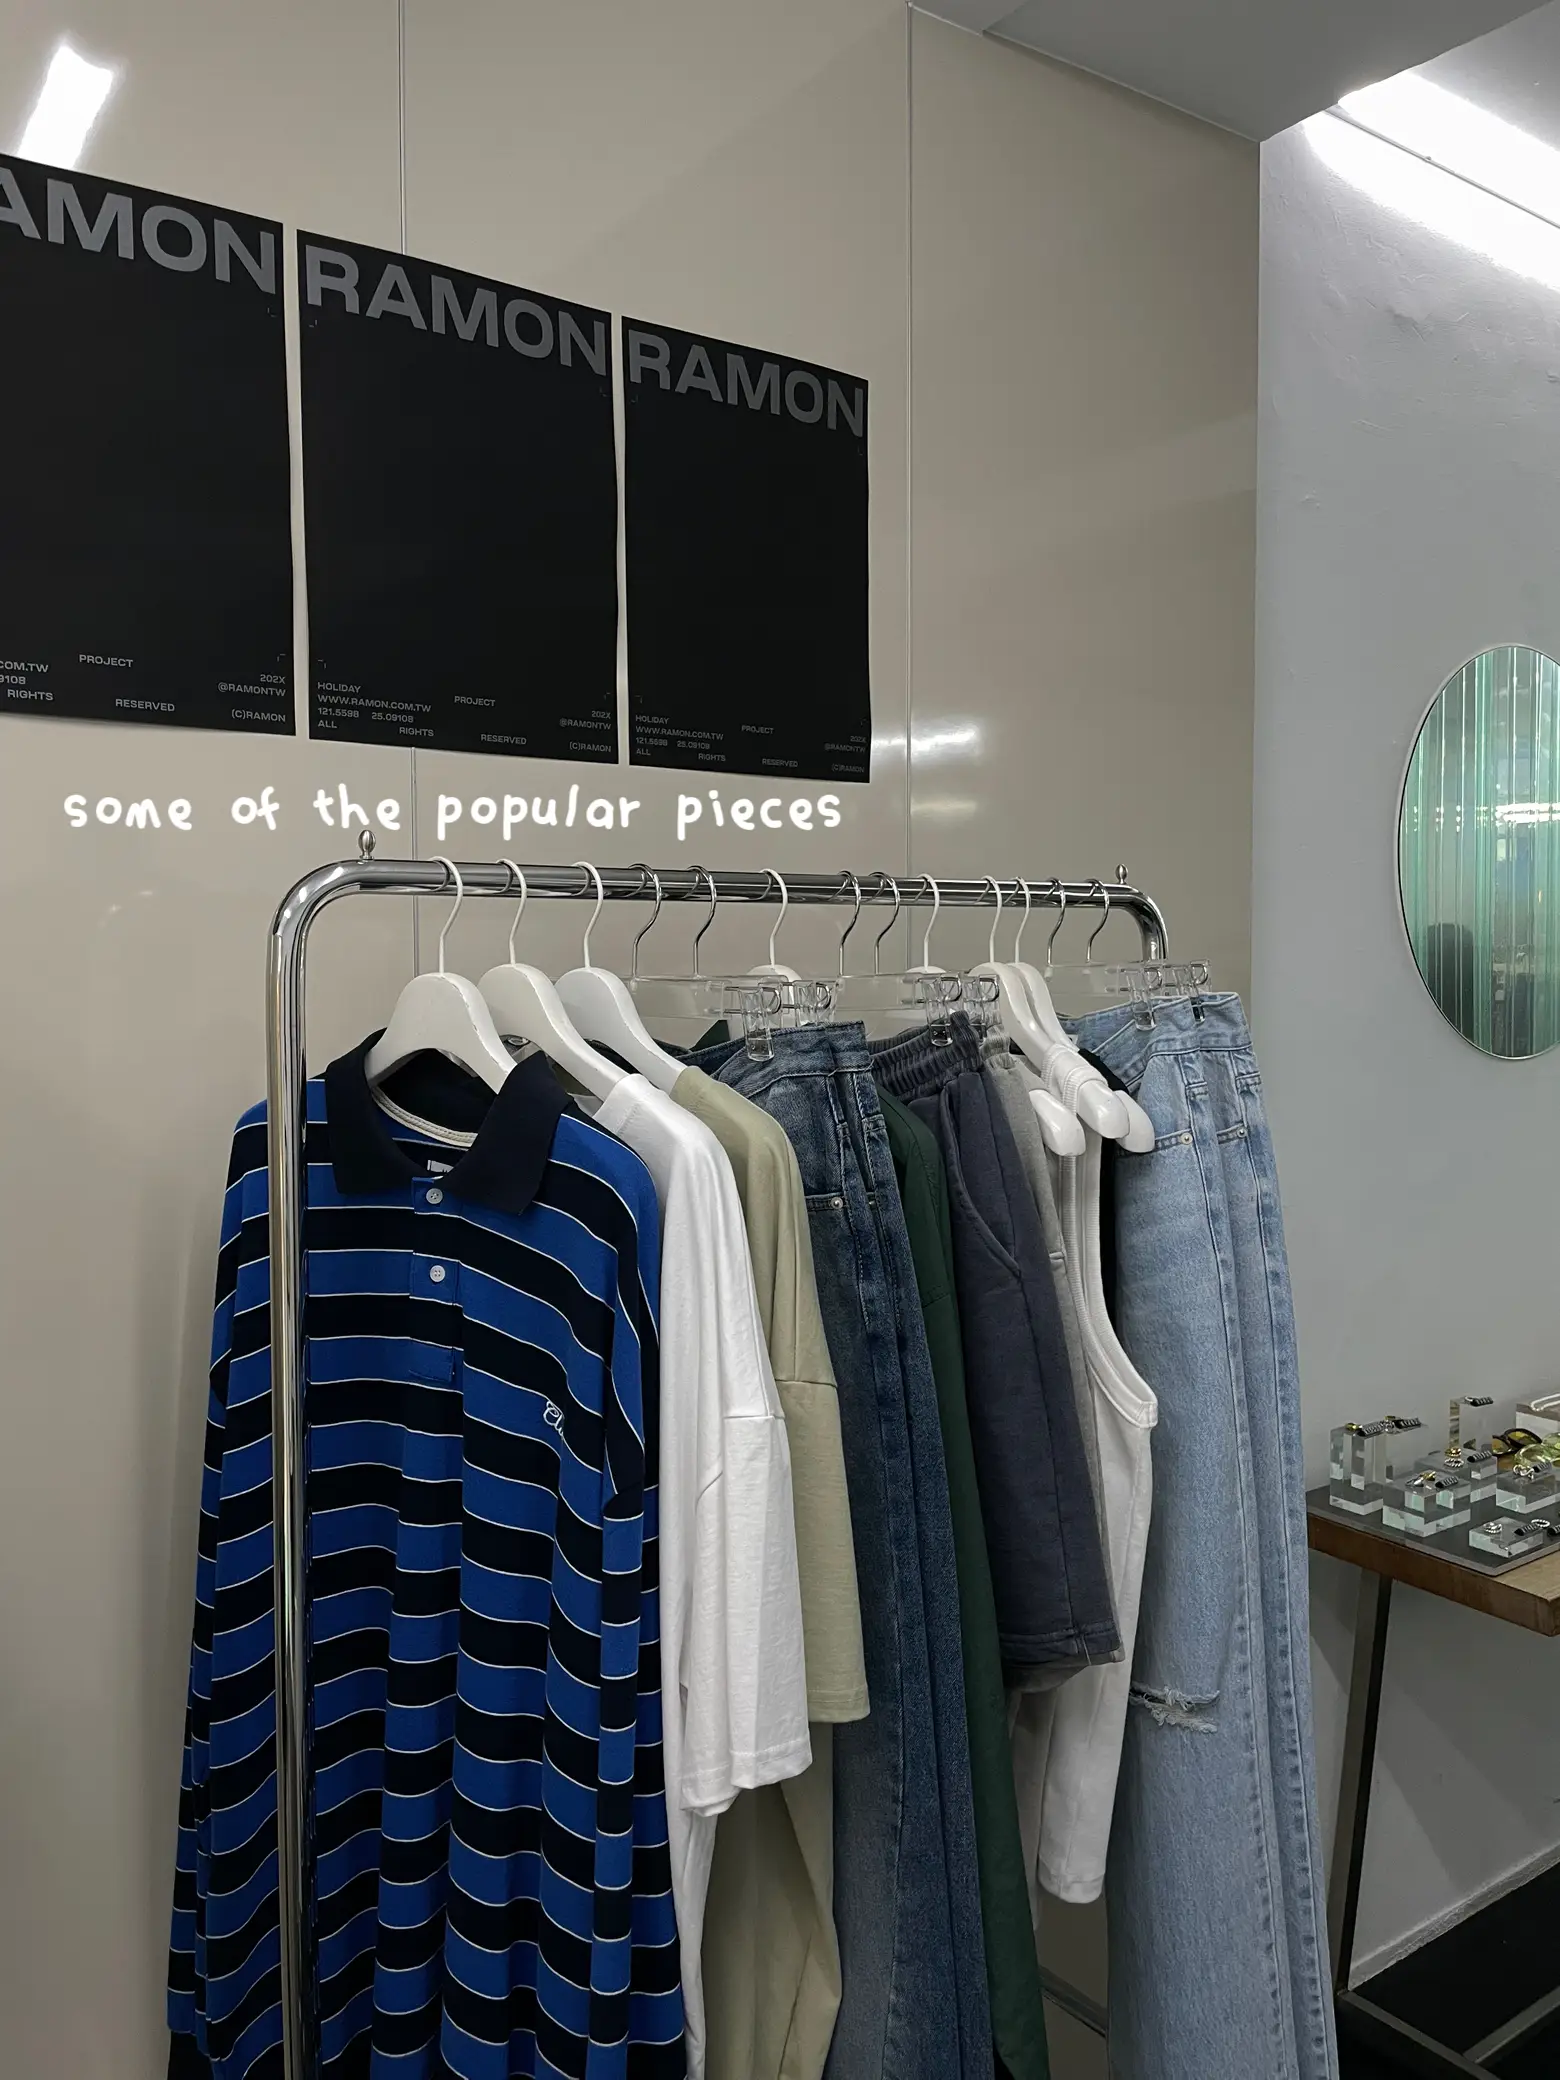 RAMON | popular clothing store in da’an district 's images(2)